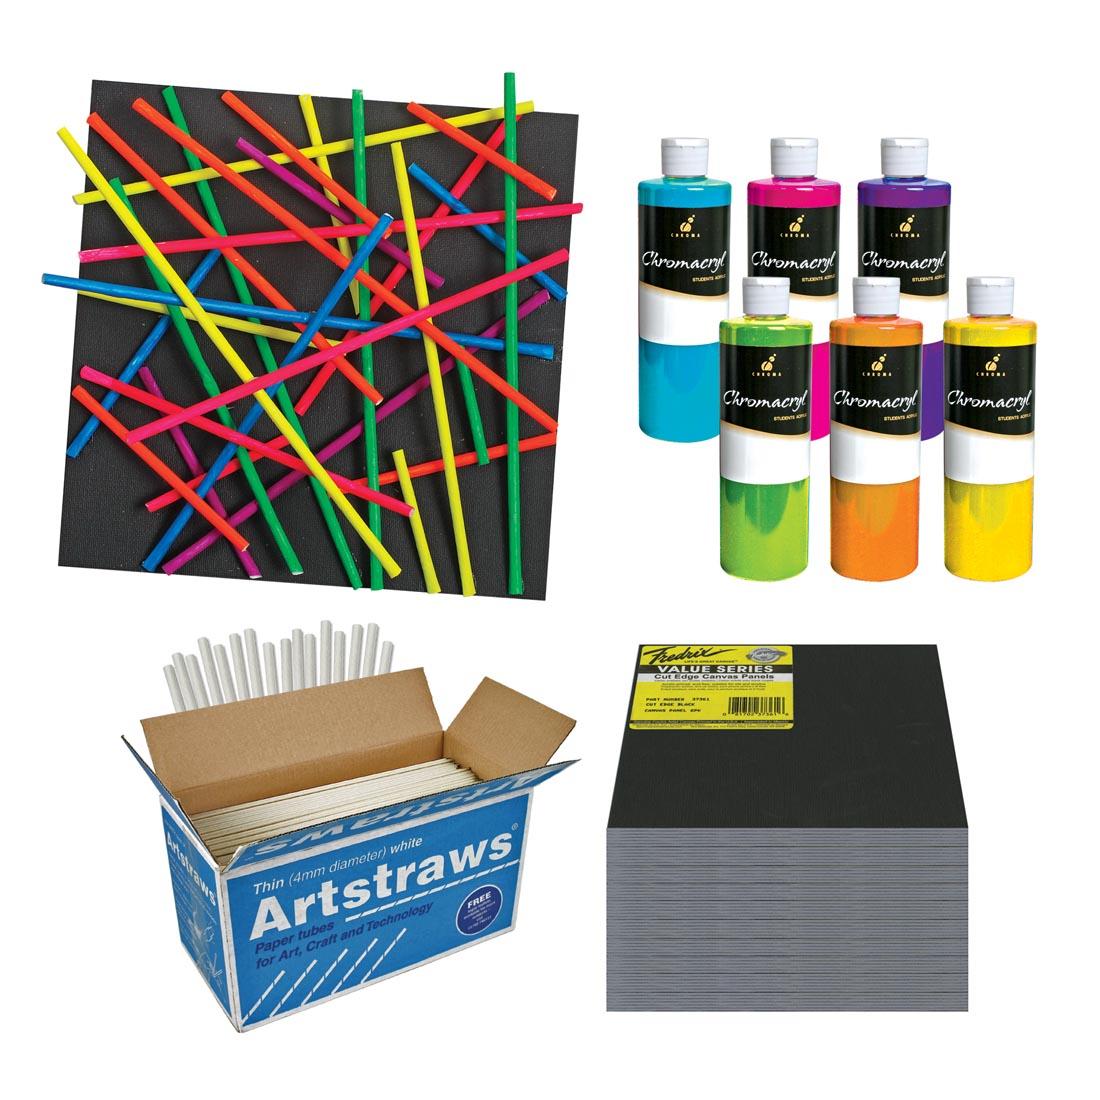 Contents of the Neon Linear Paper Straw Sculpture Project Kit plus an example of a completed sculpture